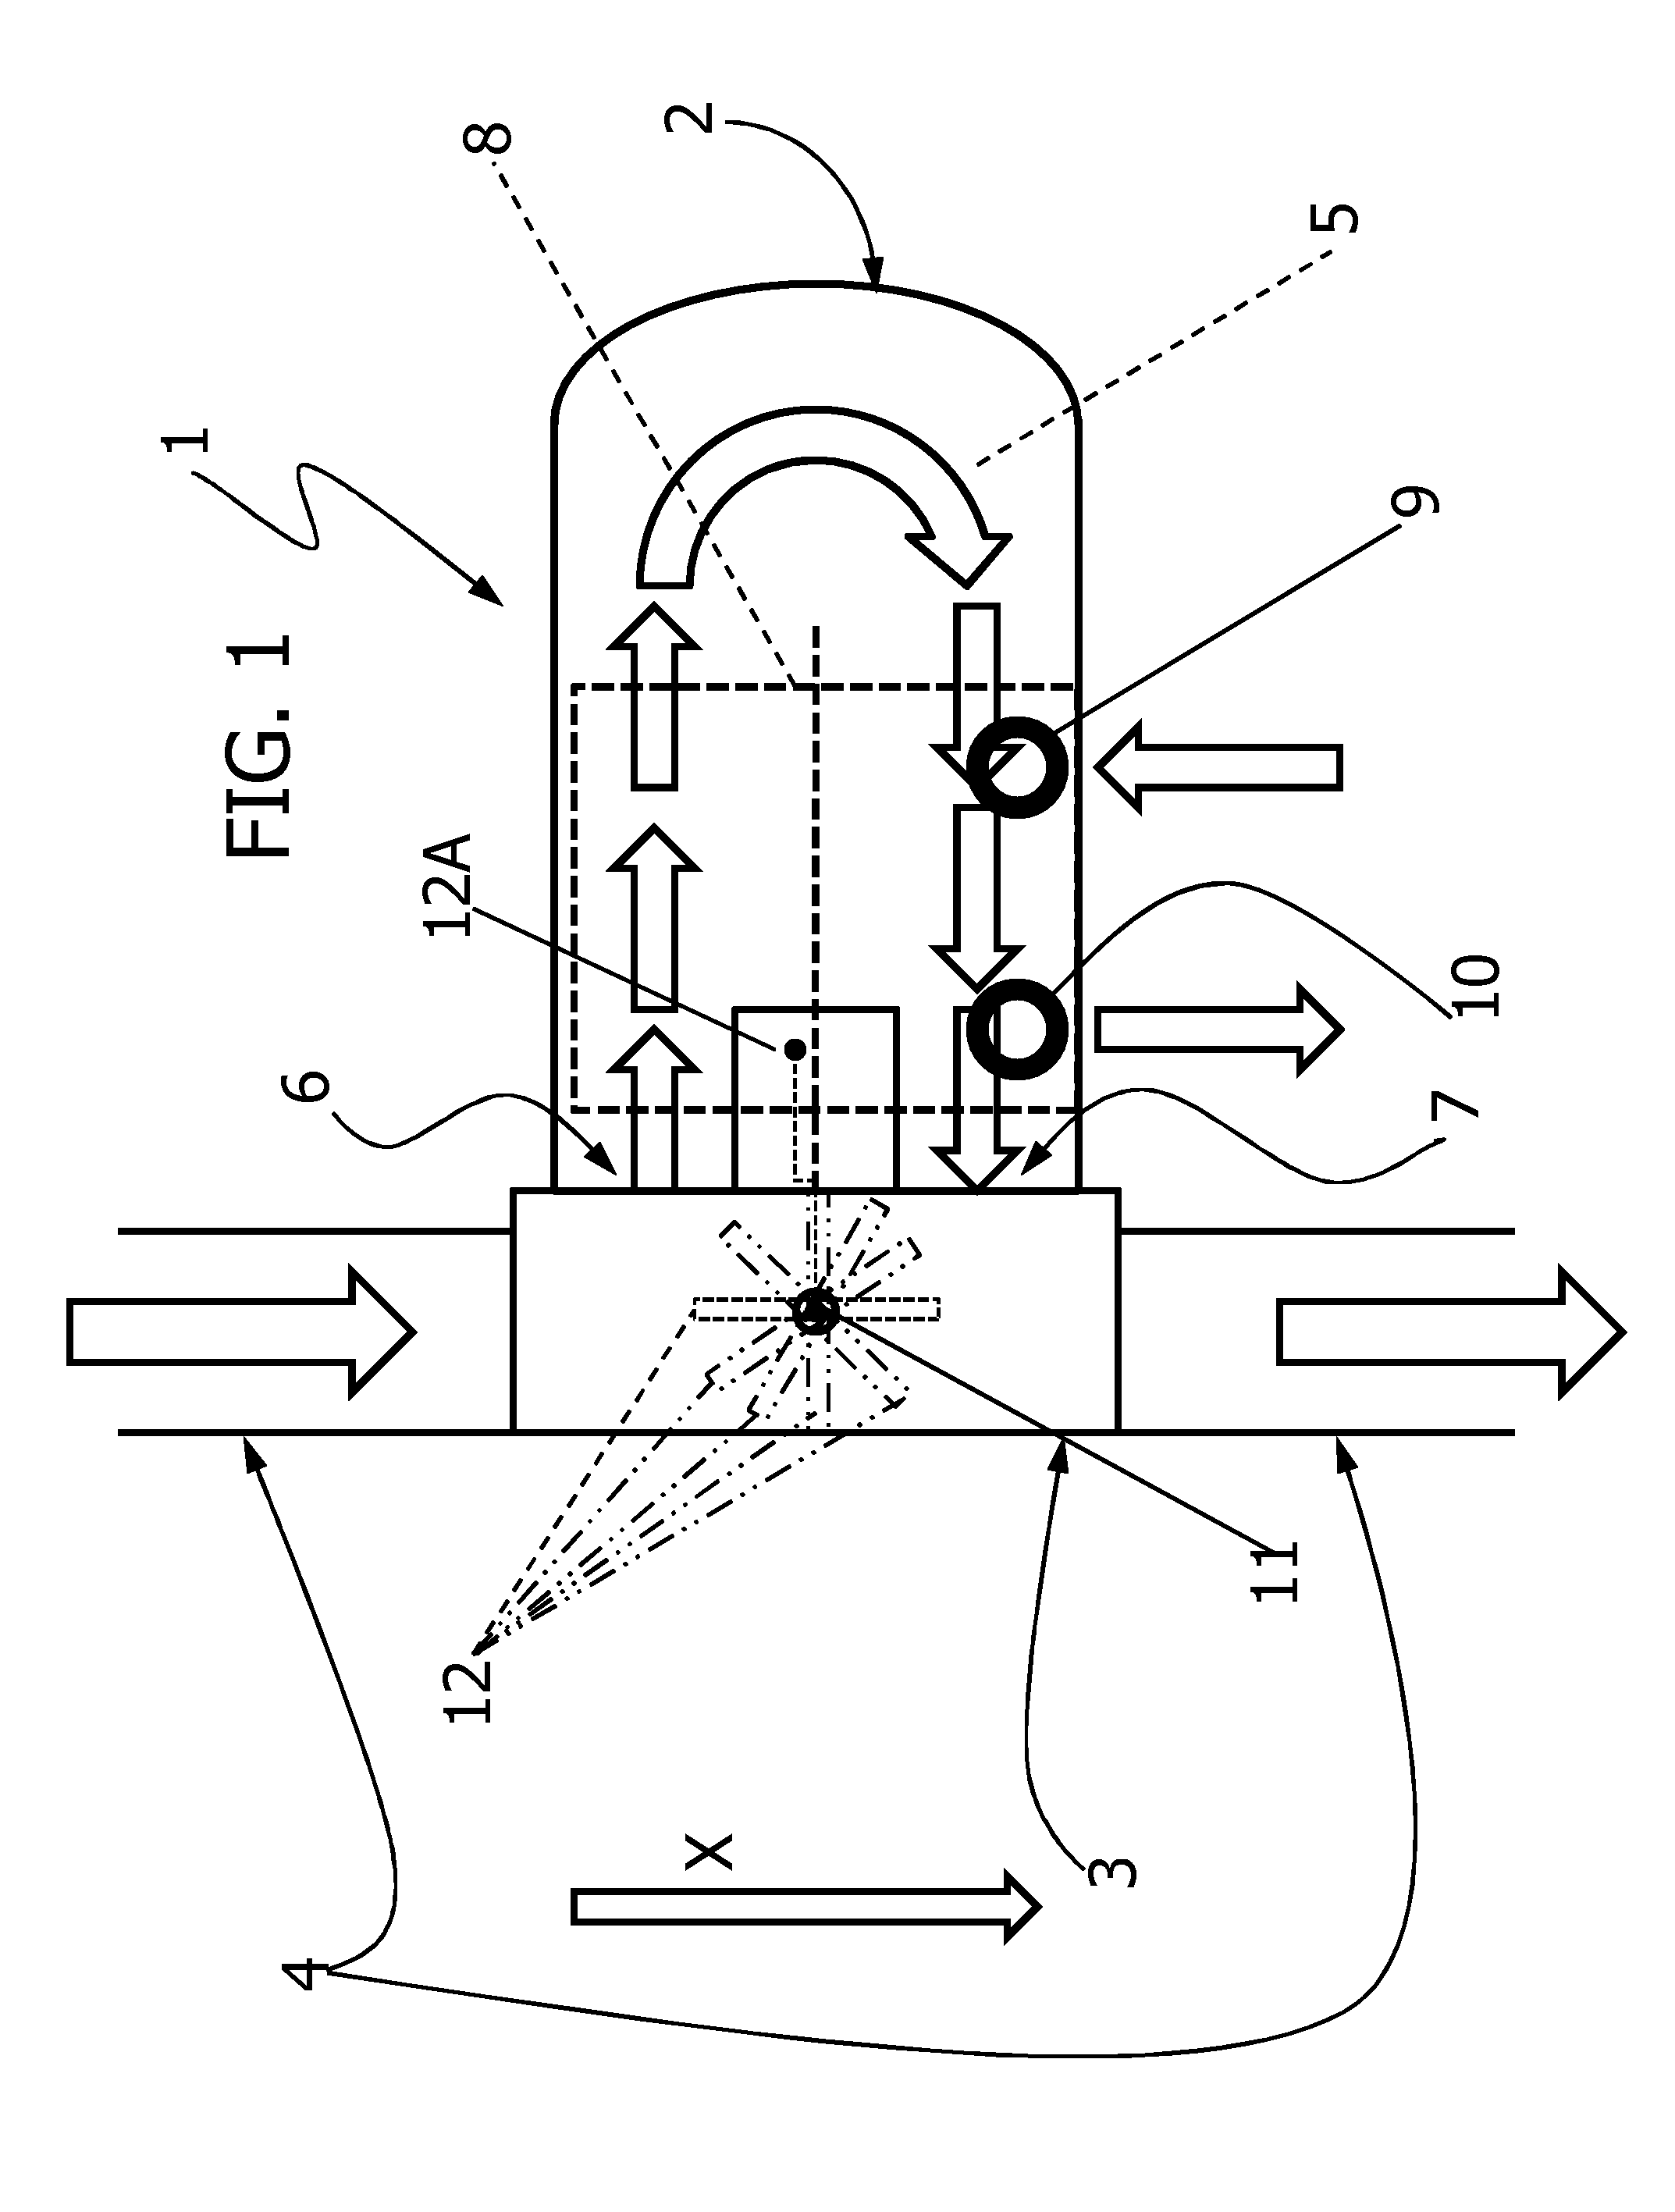 Unit for recovering and converting the thermal energy of the exhaust gases of an internal combustion engine of a vehicle